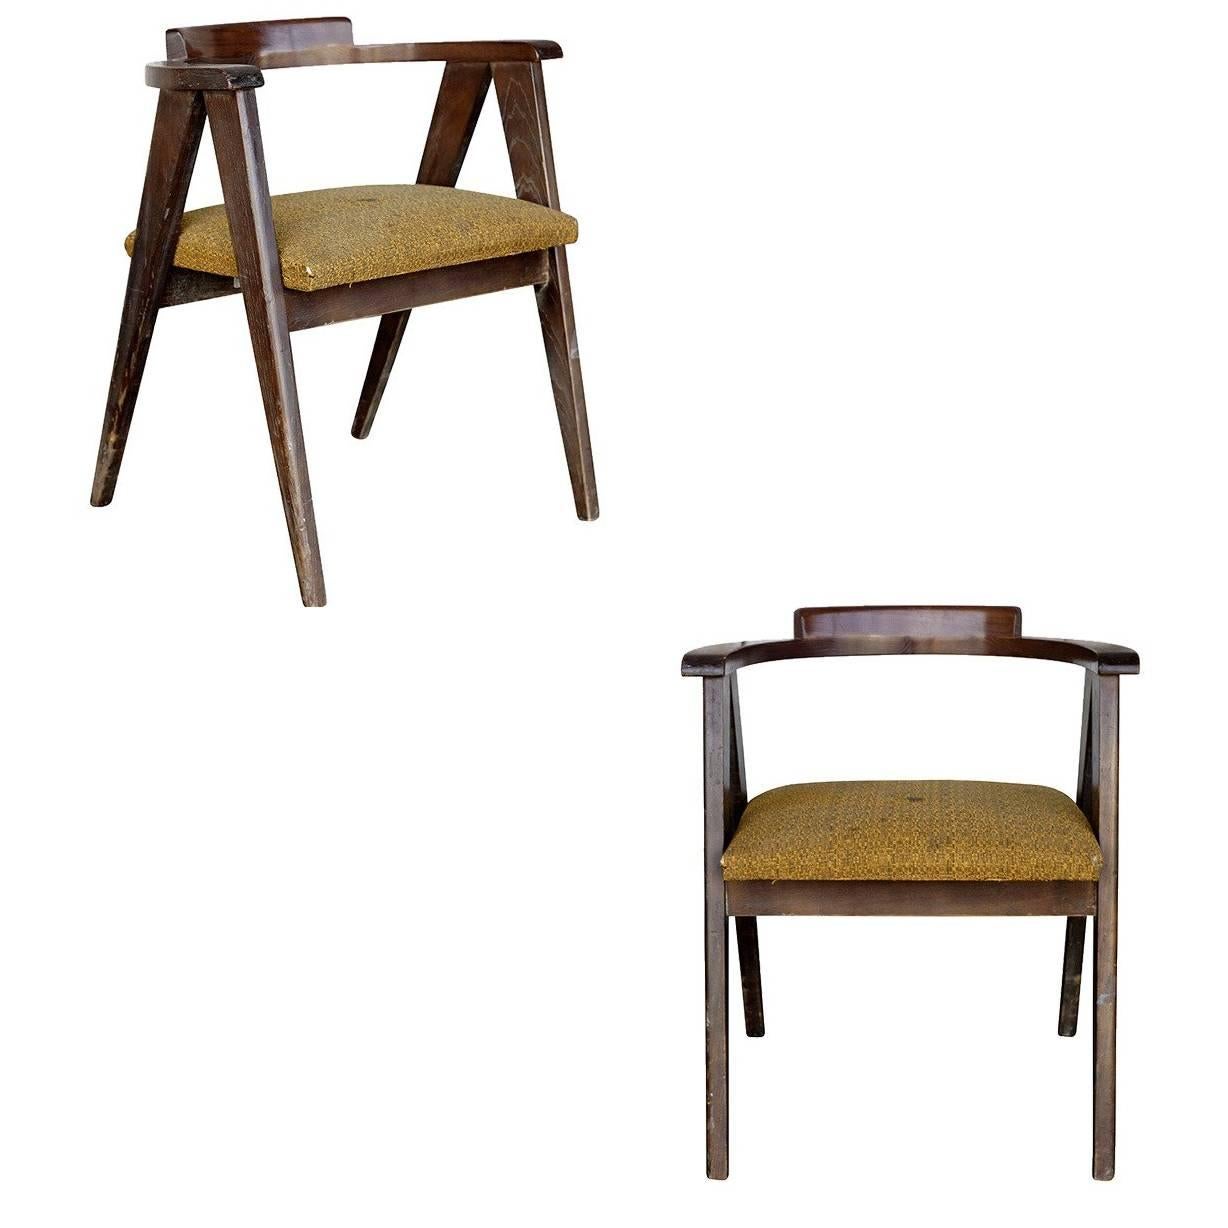 James Mont Style Asian Inspired Dining Chairs **Sature Sale**